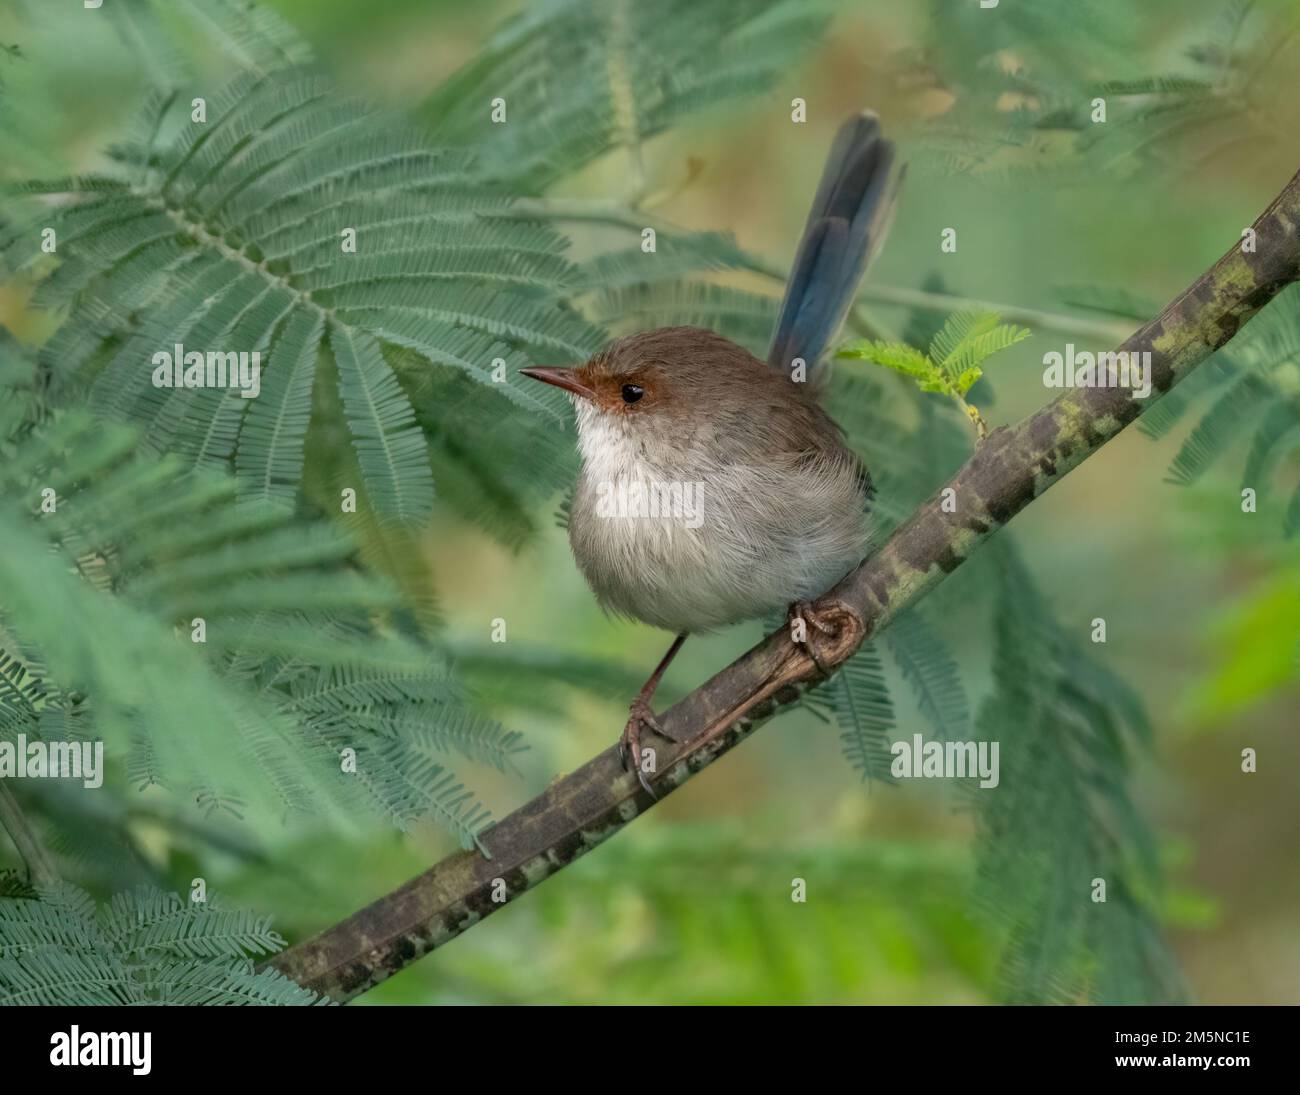 The Superb Fairy-wren (Malurus cyaneus) is found in open eucalypt woodland forests of south-eastern Australia. Female bird on a shrub Stock Photo